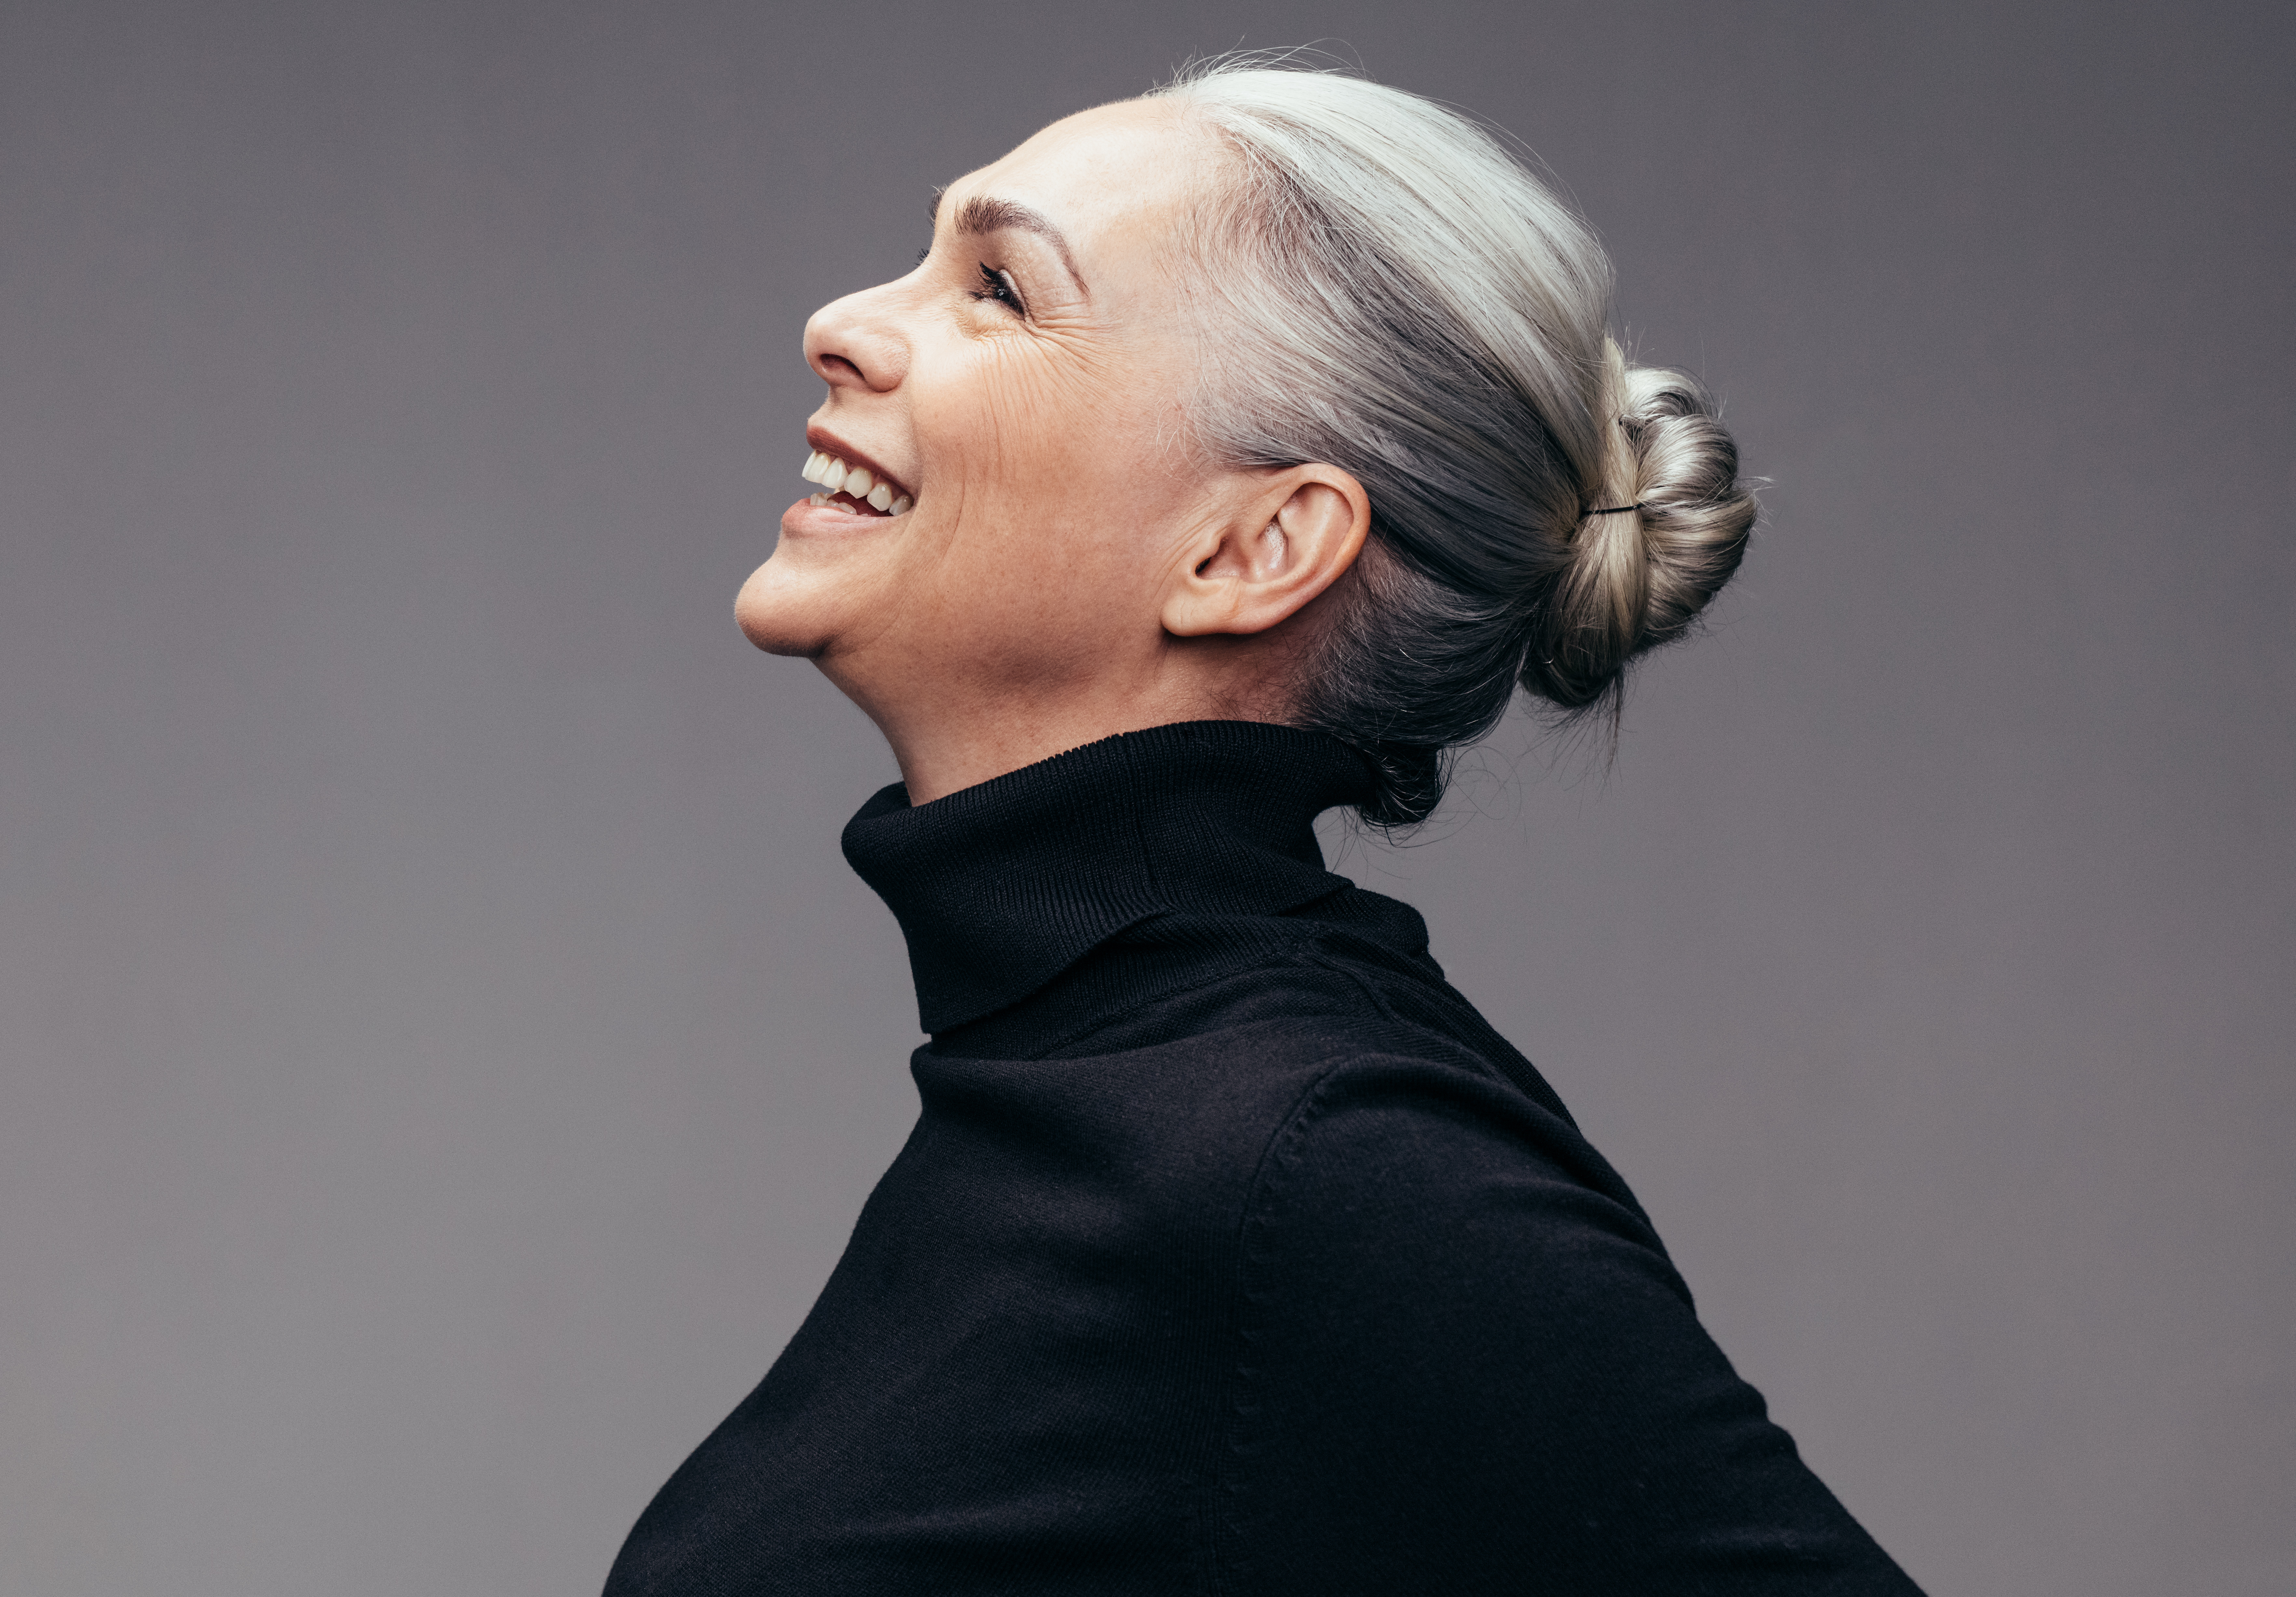 Grey-haired woman with her hair in a bun tilting her head back and laughing | Source: Shutterstock